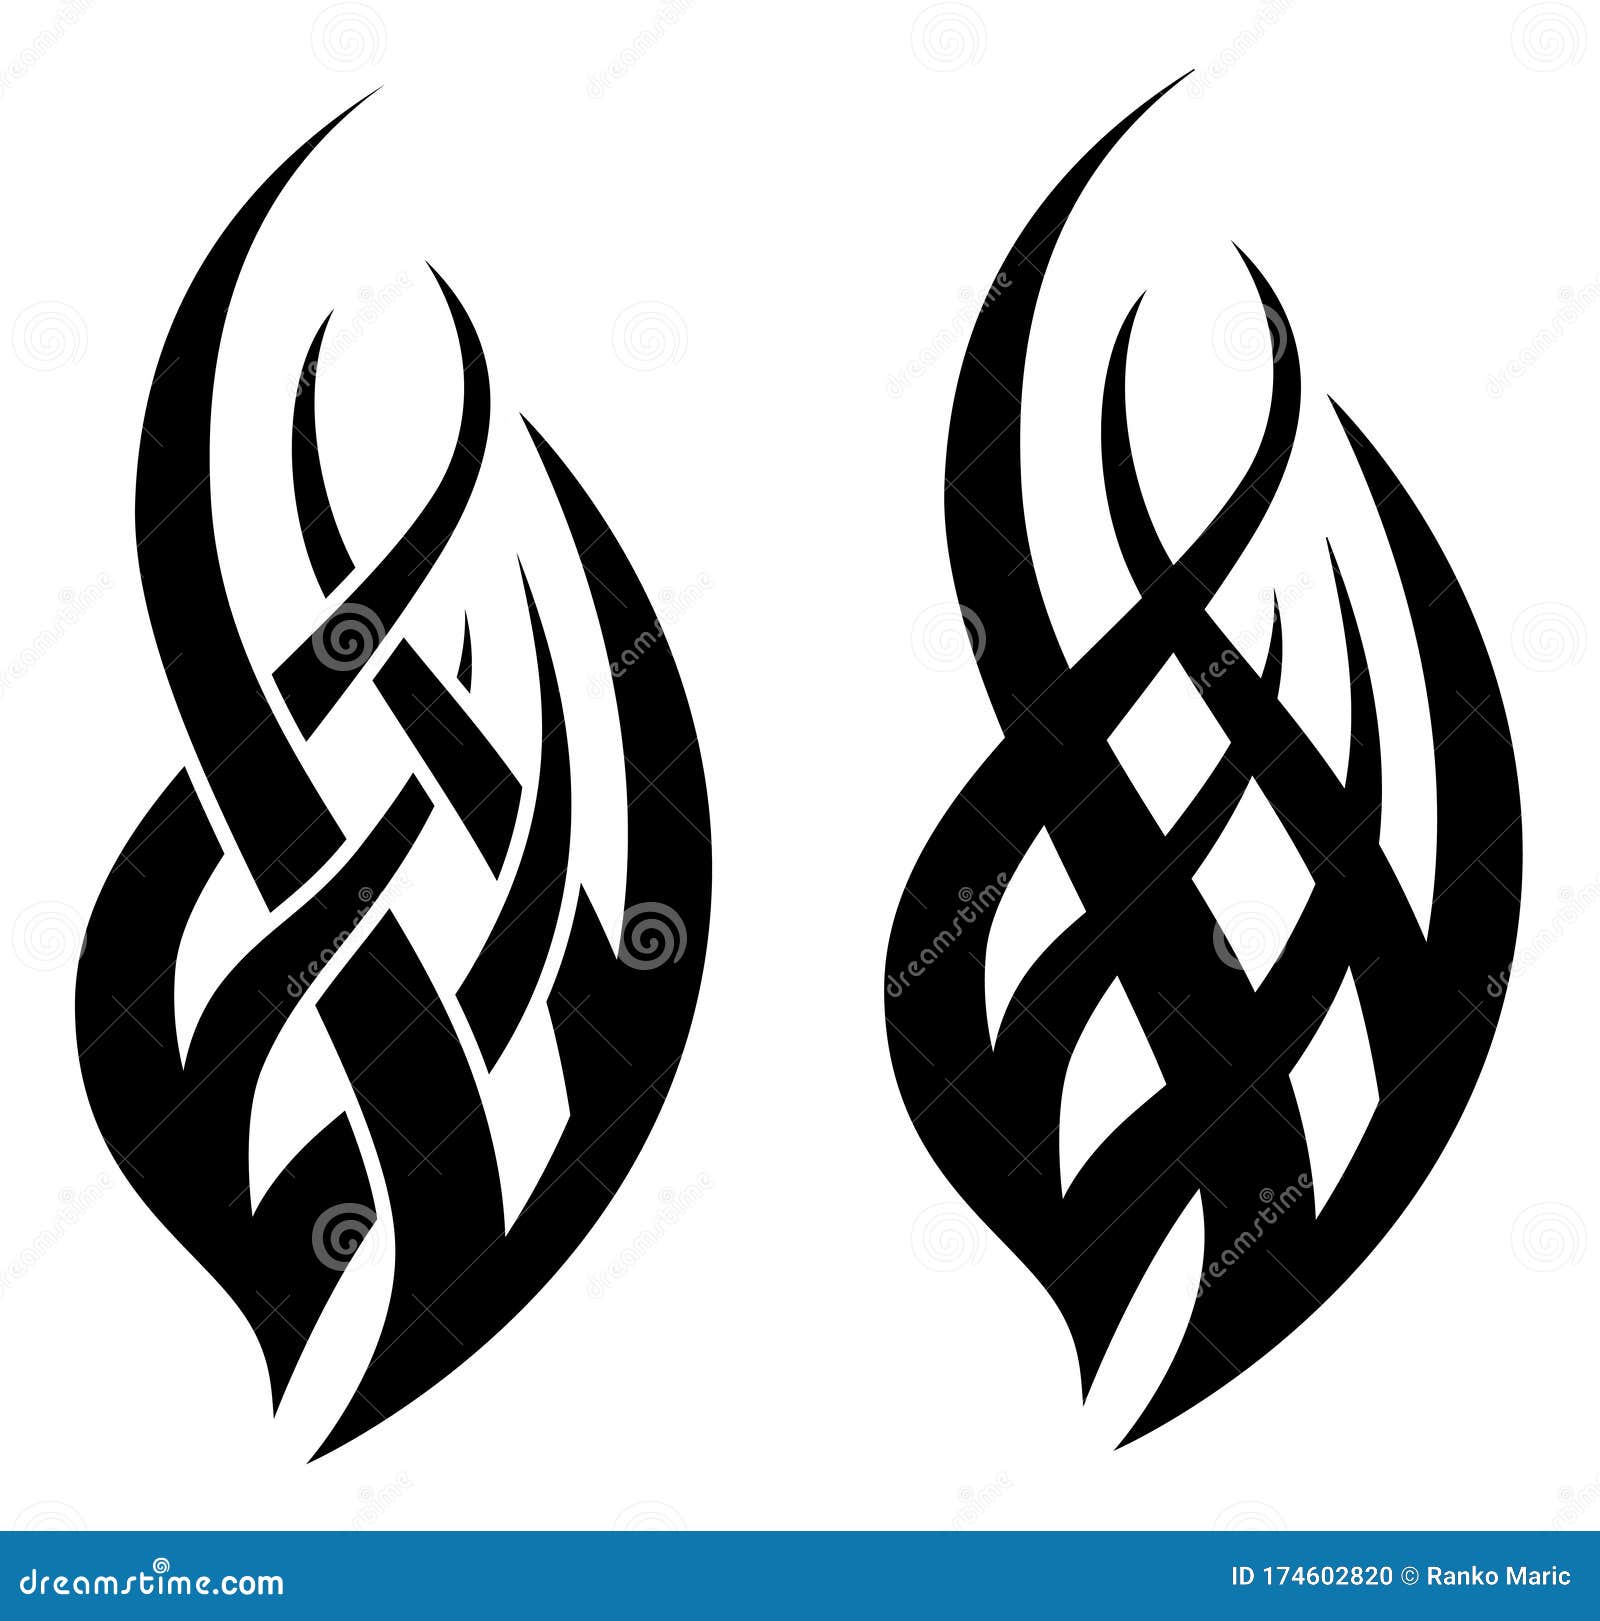 Black And White Flame Tattoos  ClipArt Best